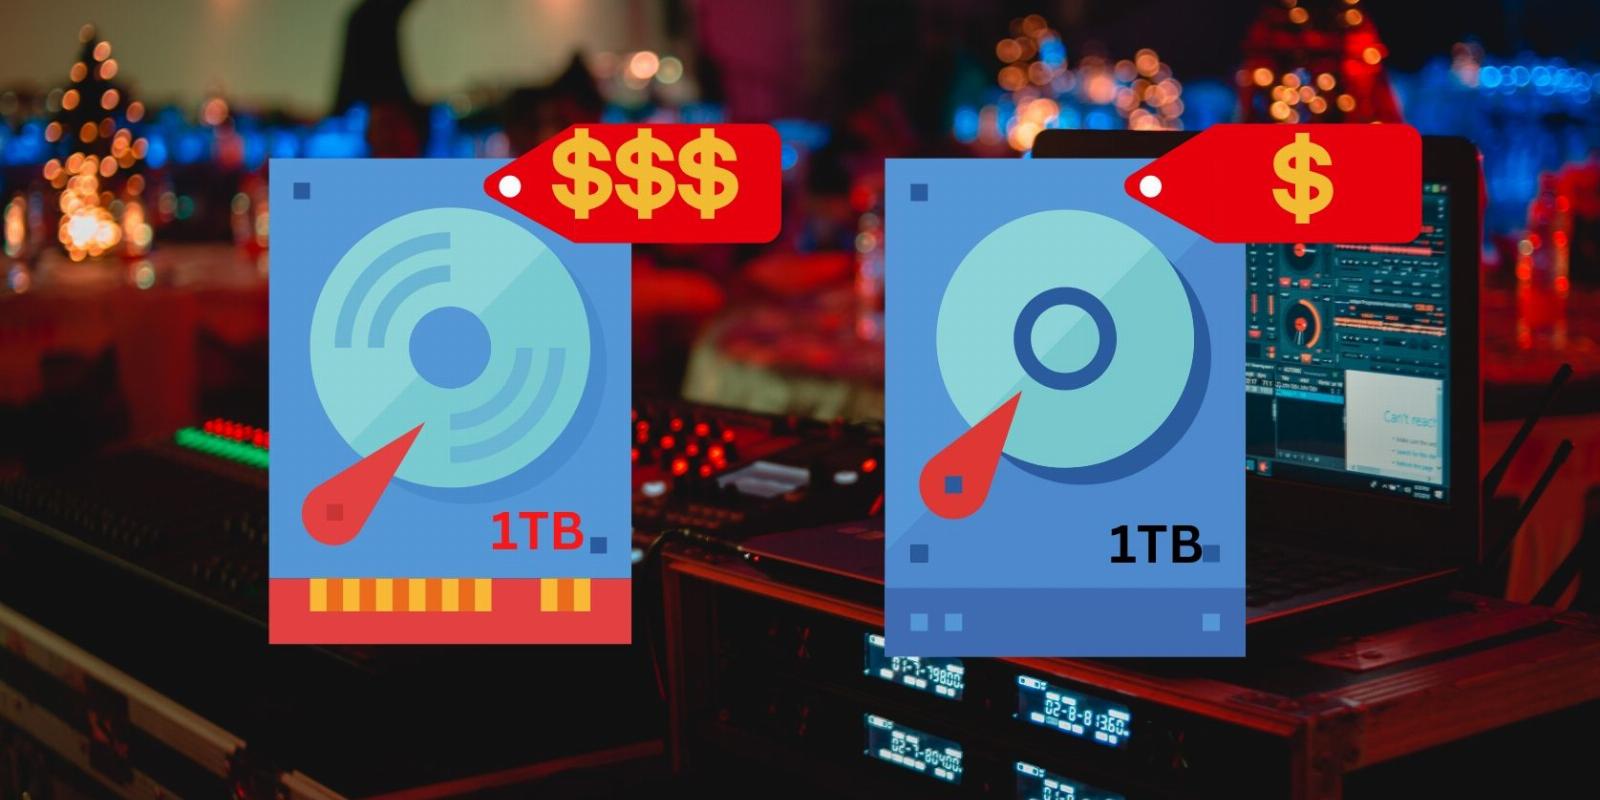 7 Reasons Why Servers Are More Expensive Than Similarly Specced PC Hardware